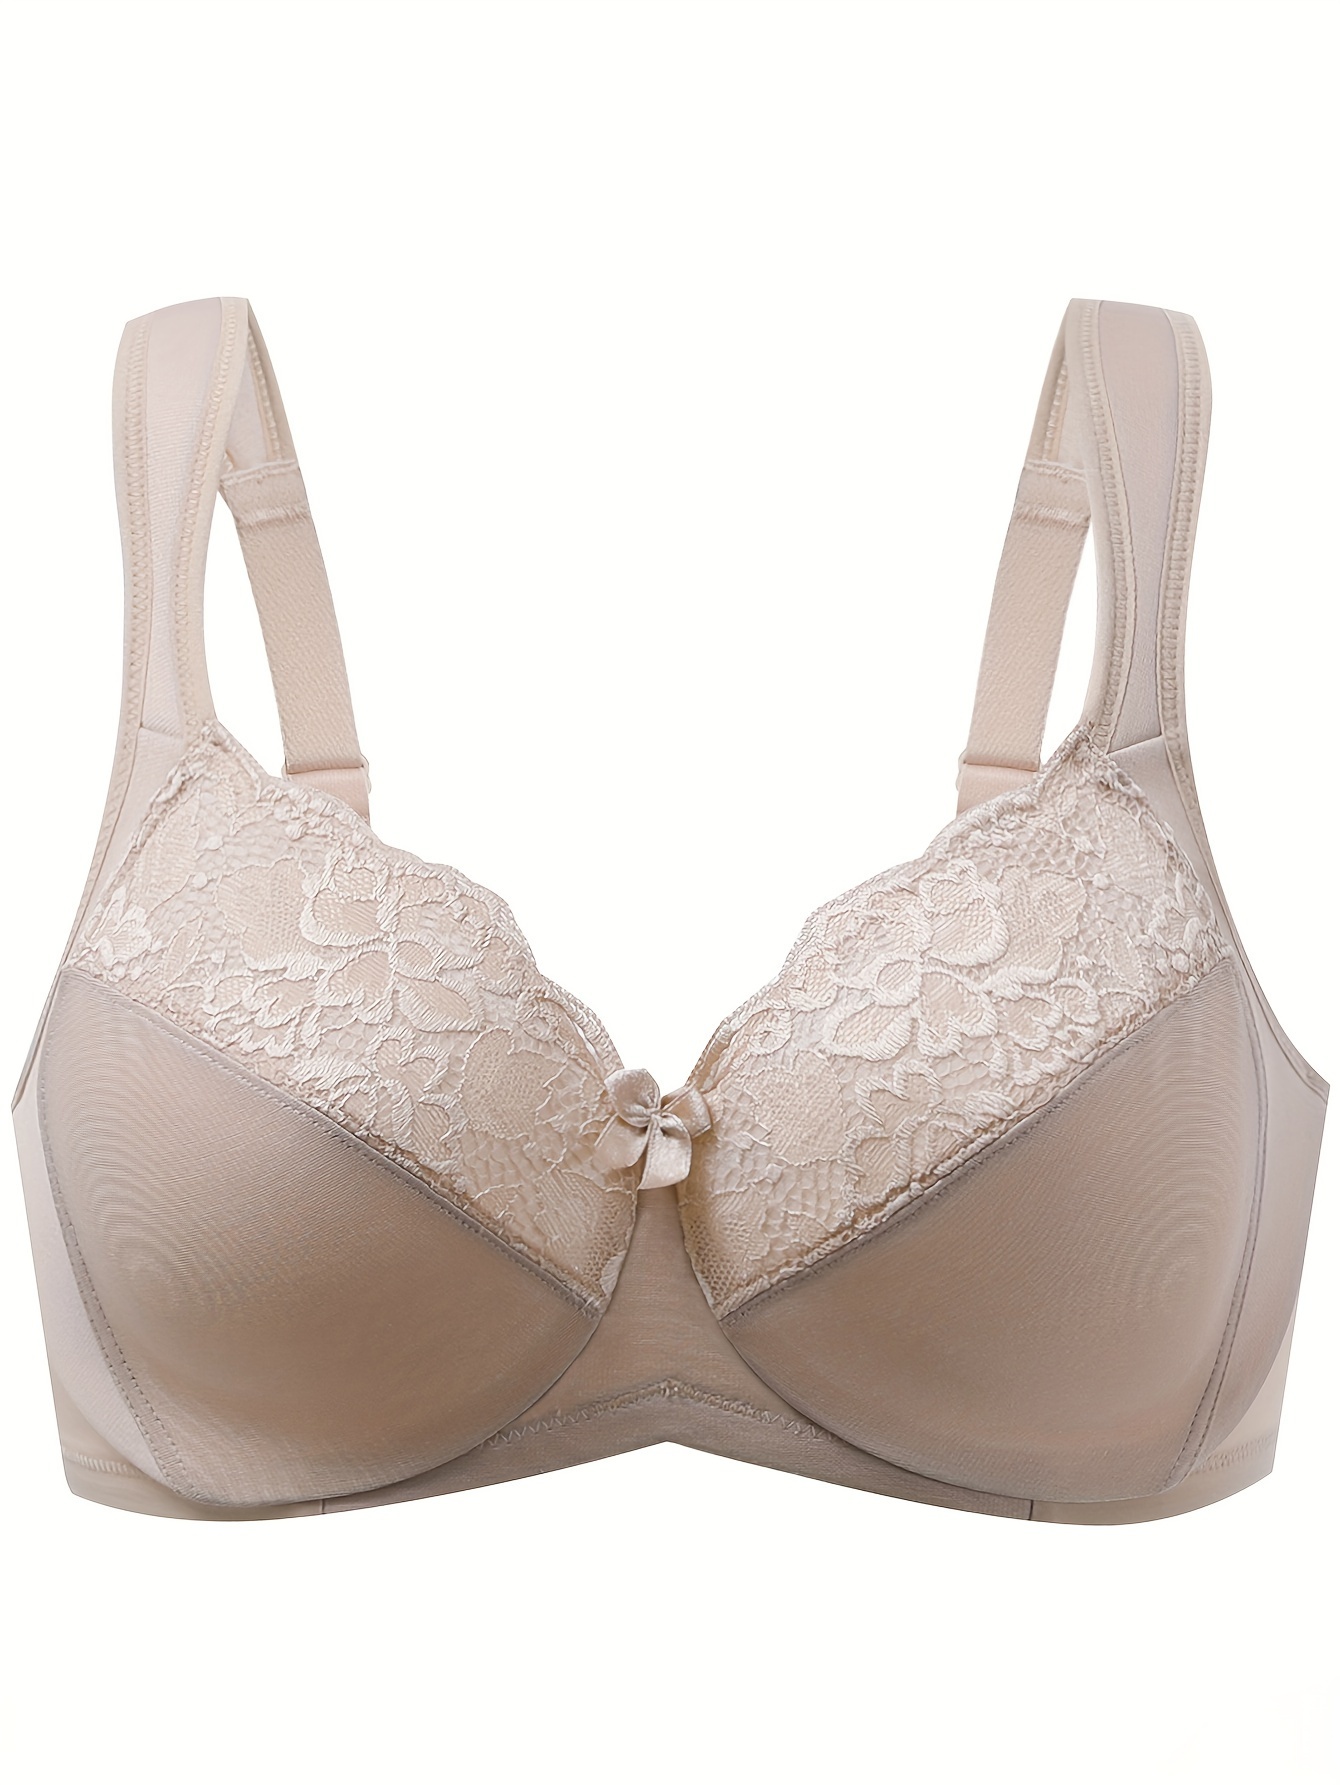 Sexy Womens Lace Mesh Minimizer Bras Full Coverage Non Padded